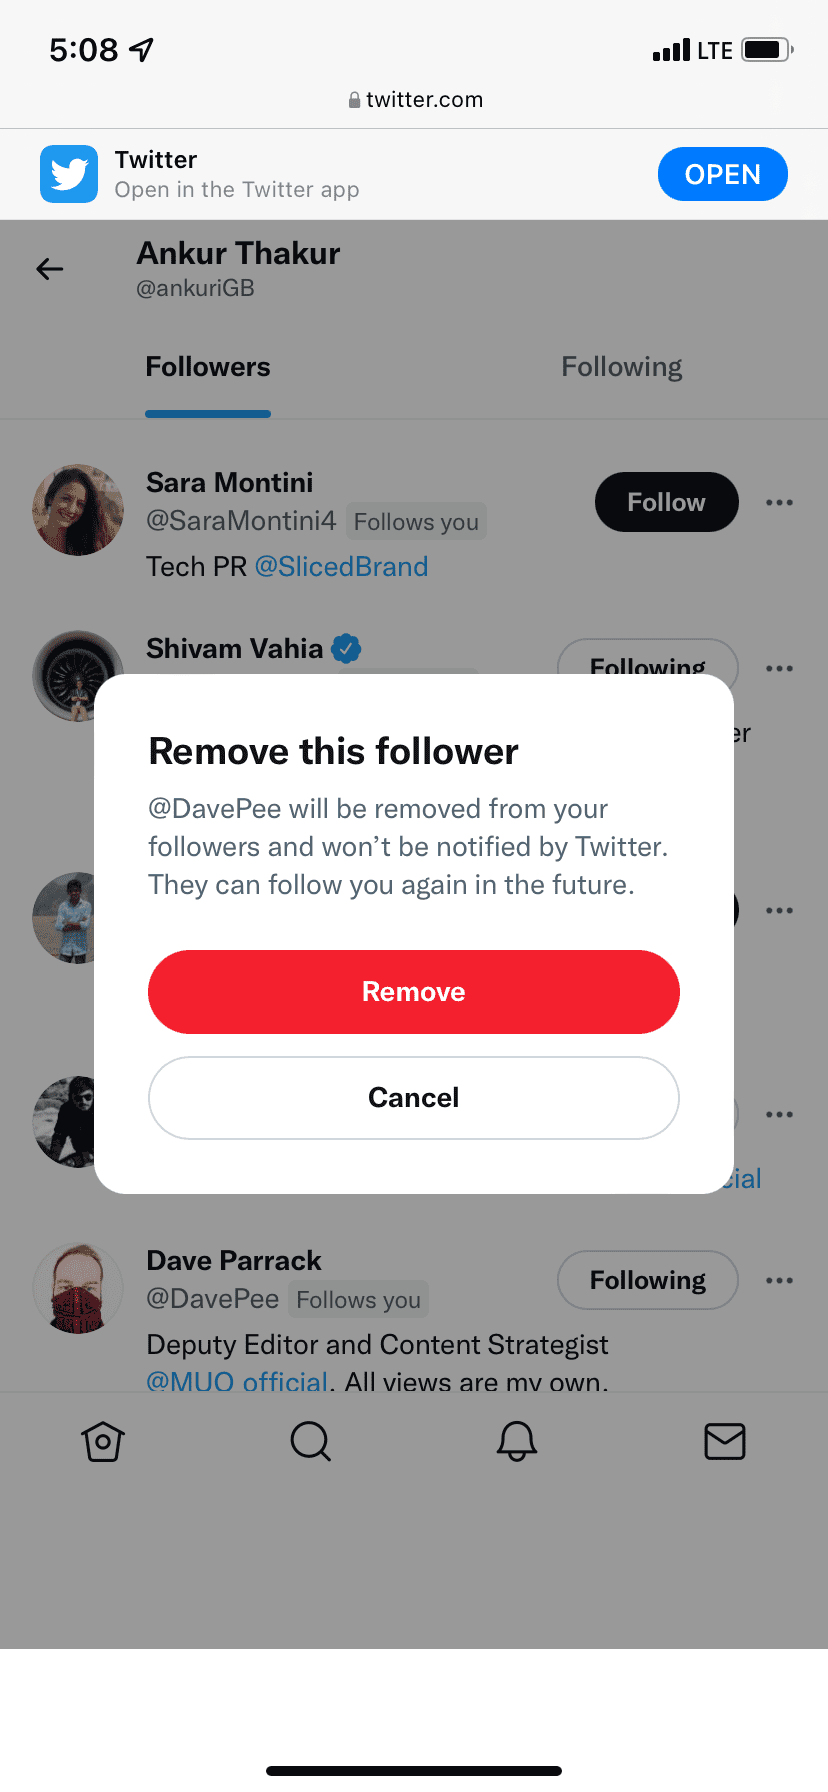 Confirm to remove follower on Twitter